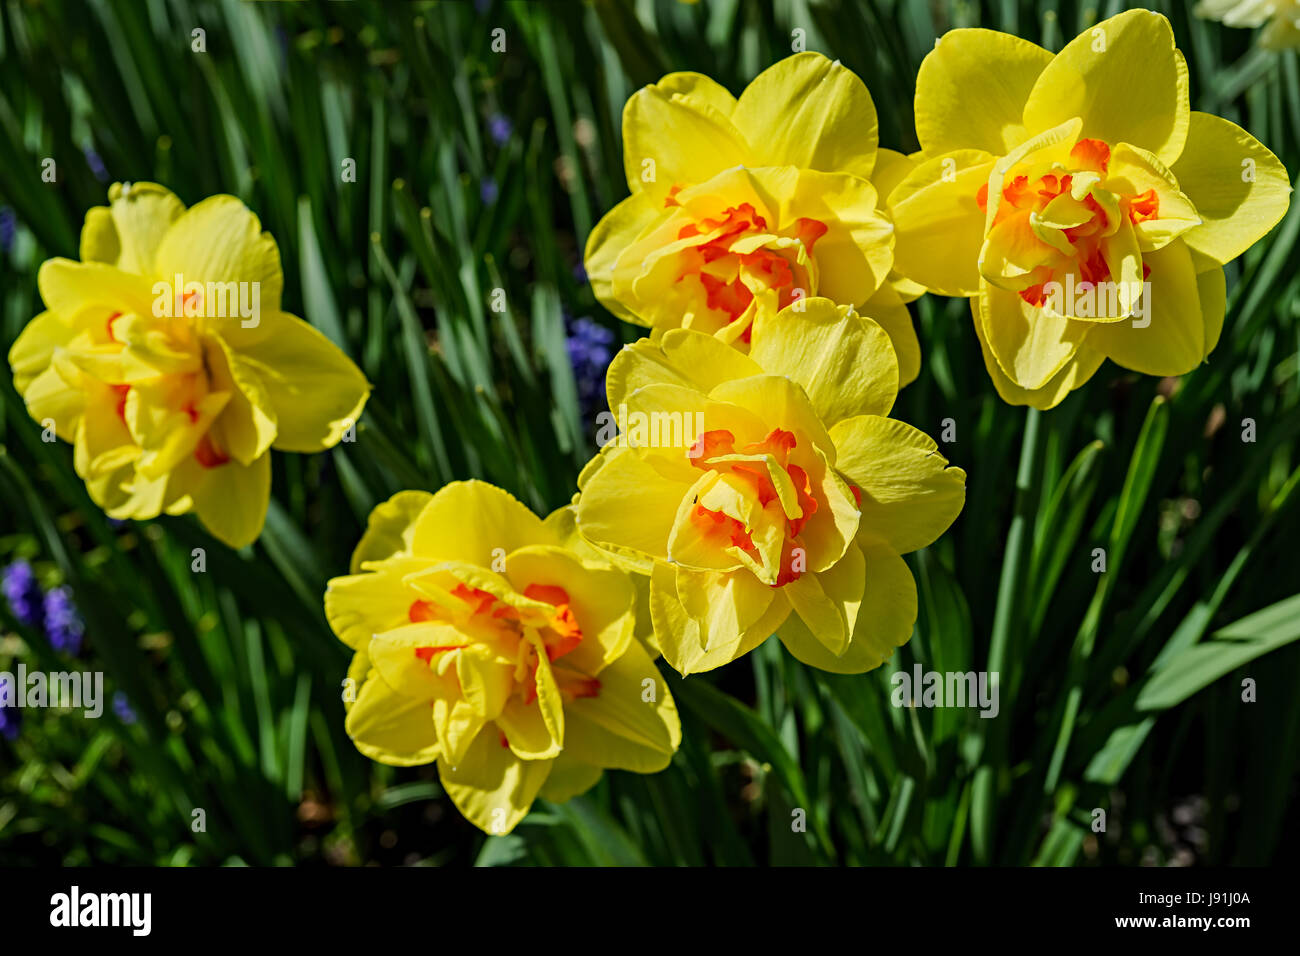 Double daffodils in the home garden. Stock Photo